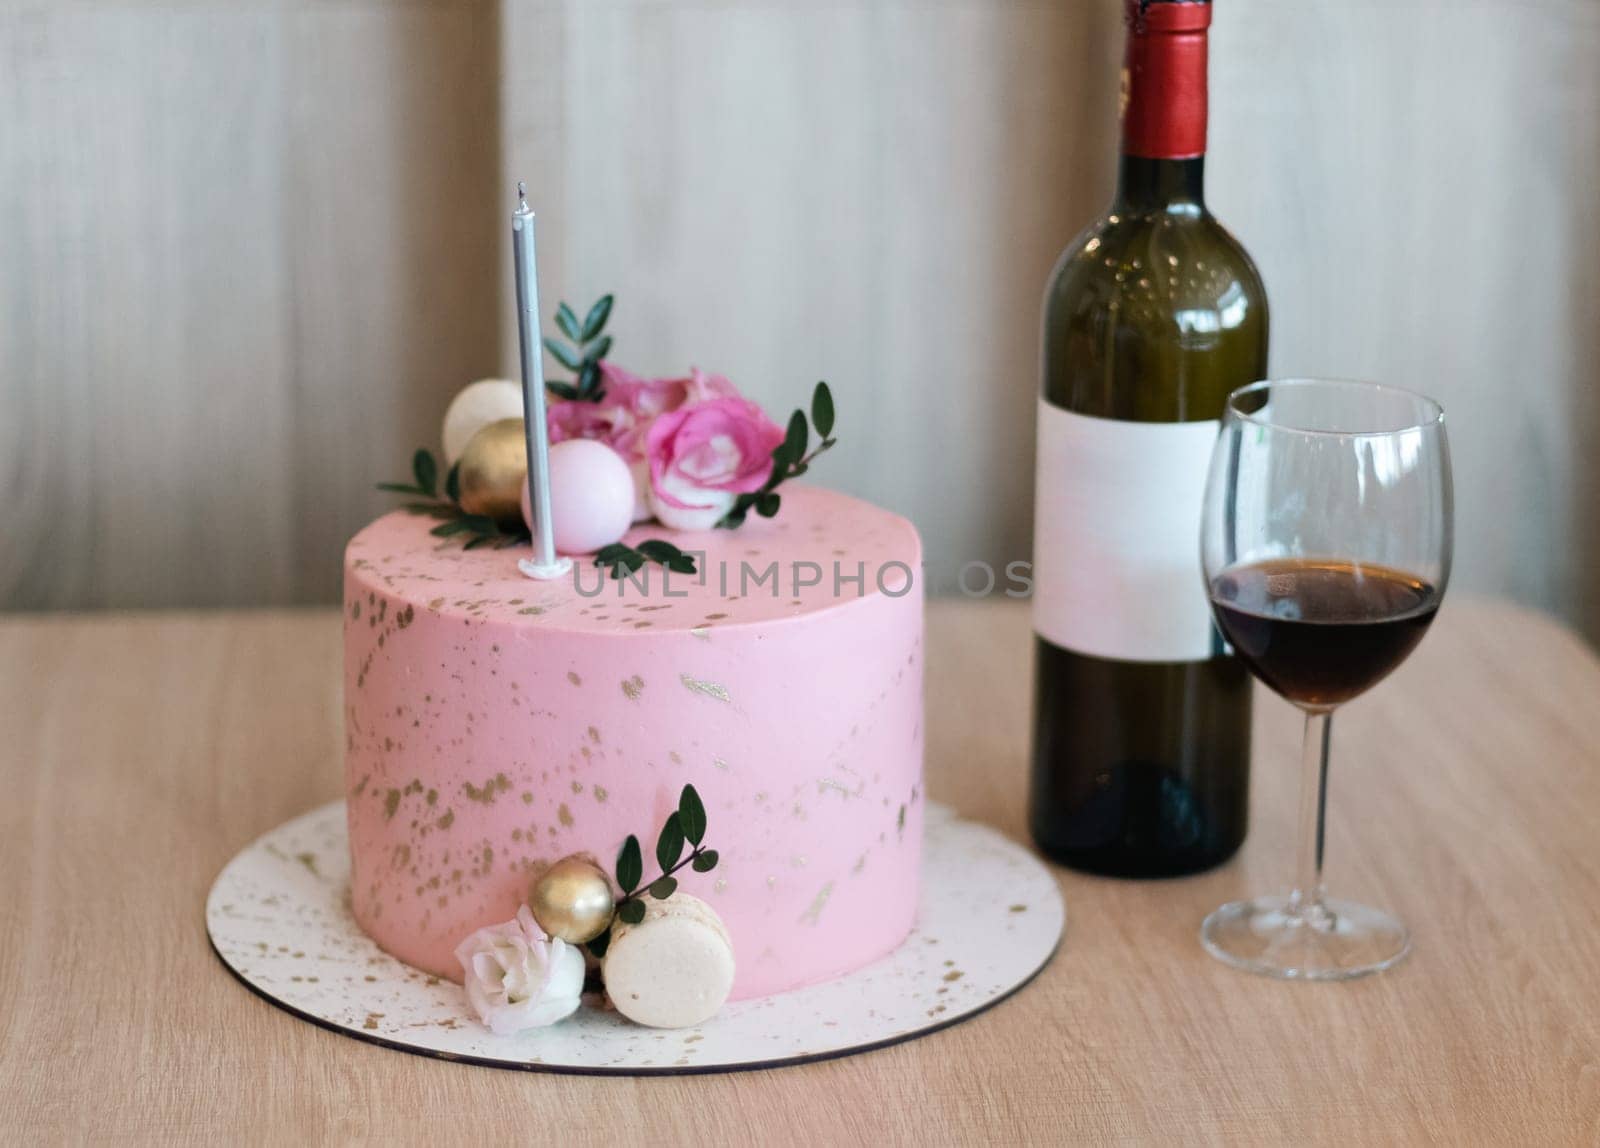 One beautiful anniversary pink cake with fresh rose flowers, a candle, a bottle of red wine and a glass are on the table, close-up side view.